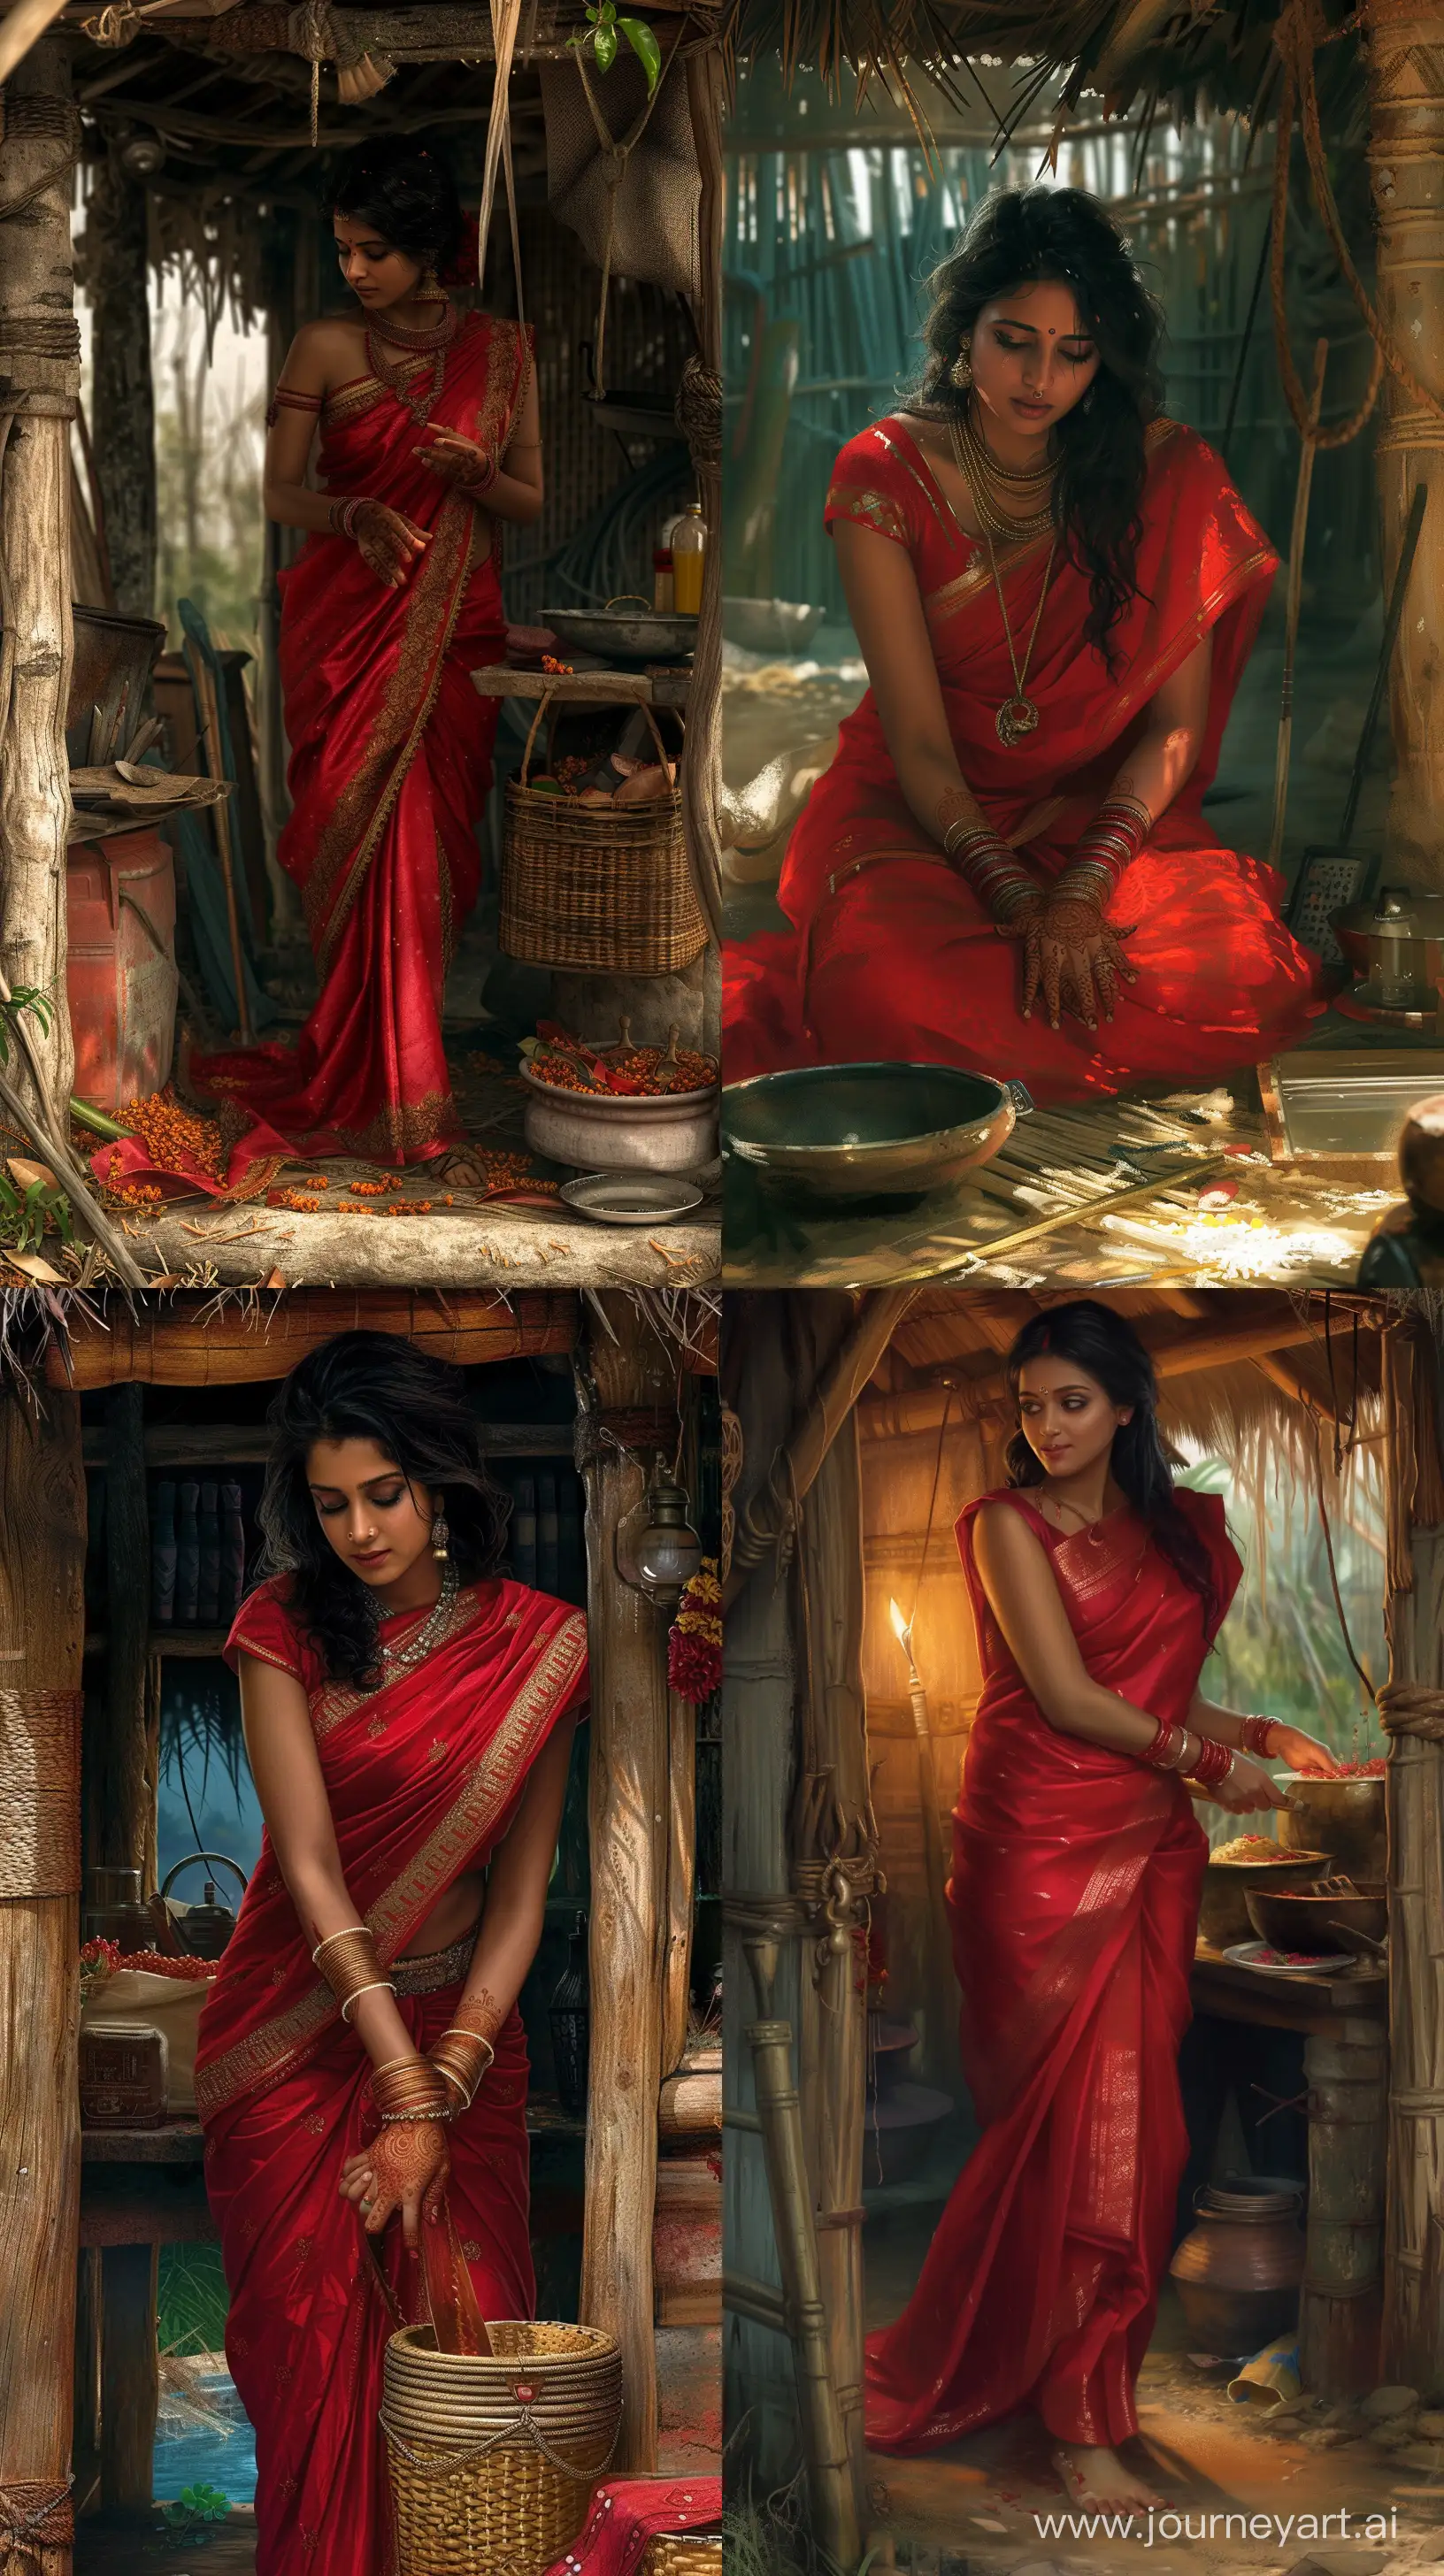 Vibrant-Indian-Woman-Engaged-in-Traditional-Household-Chores